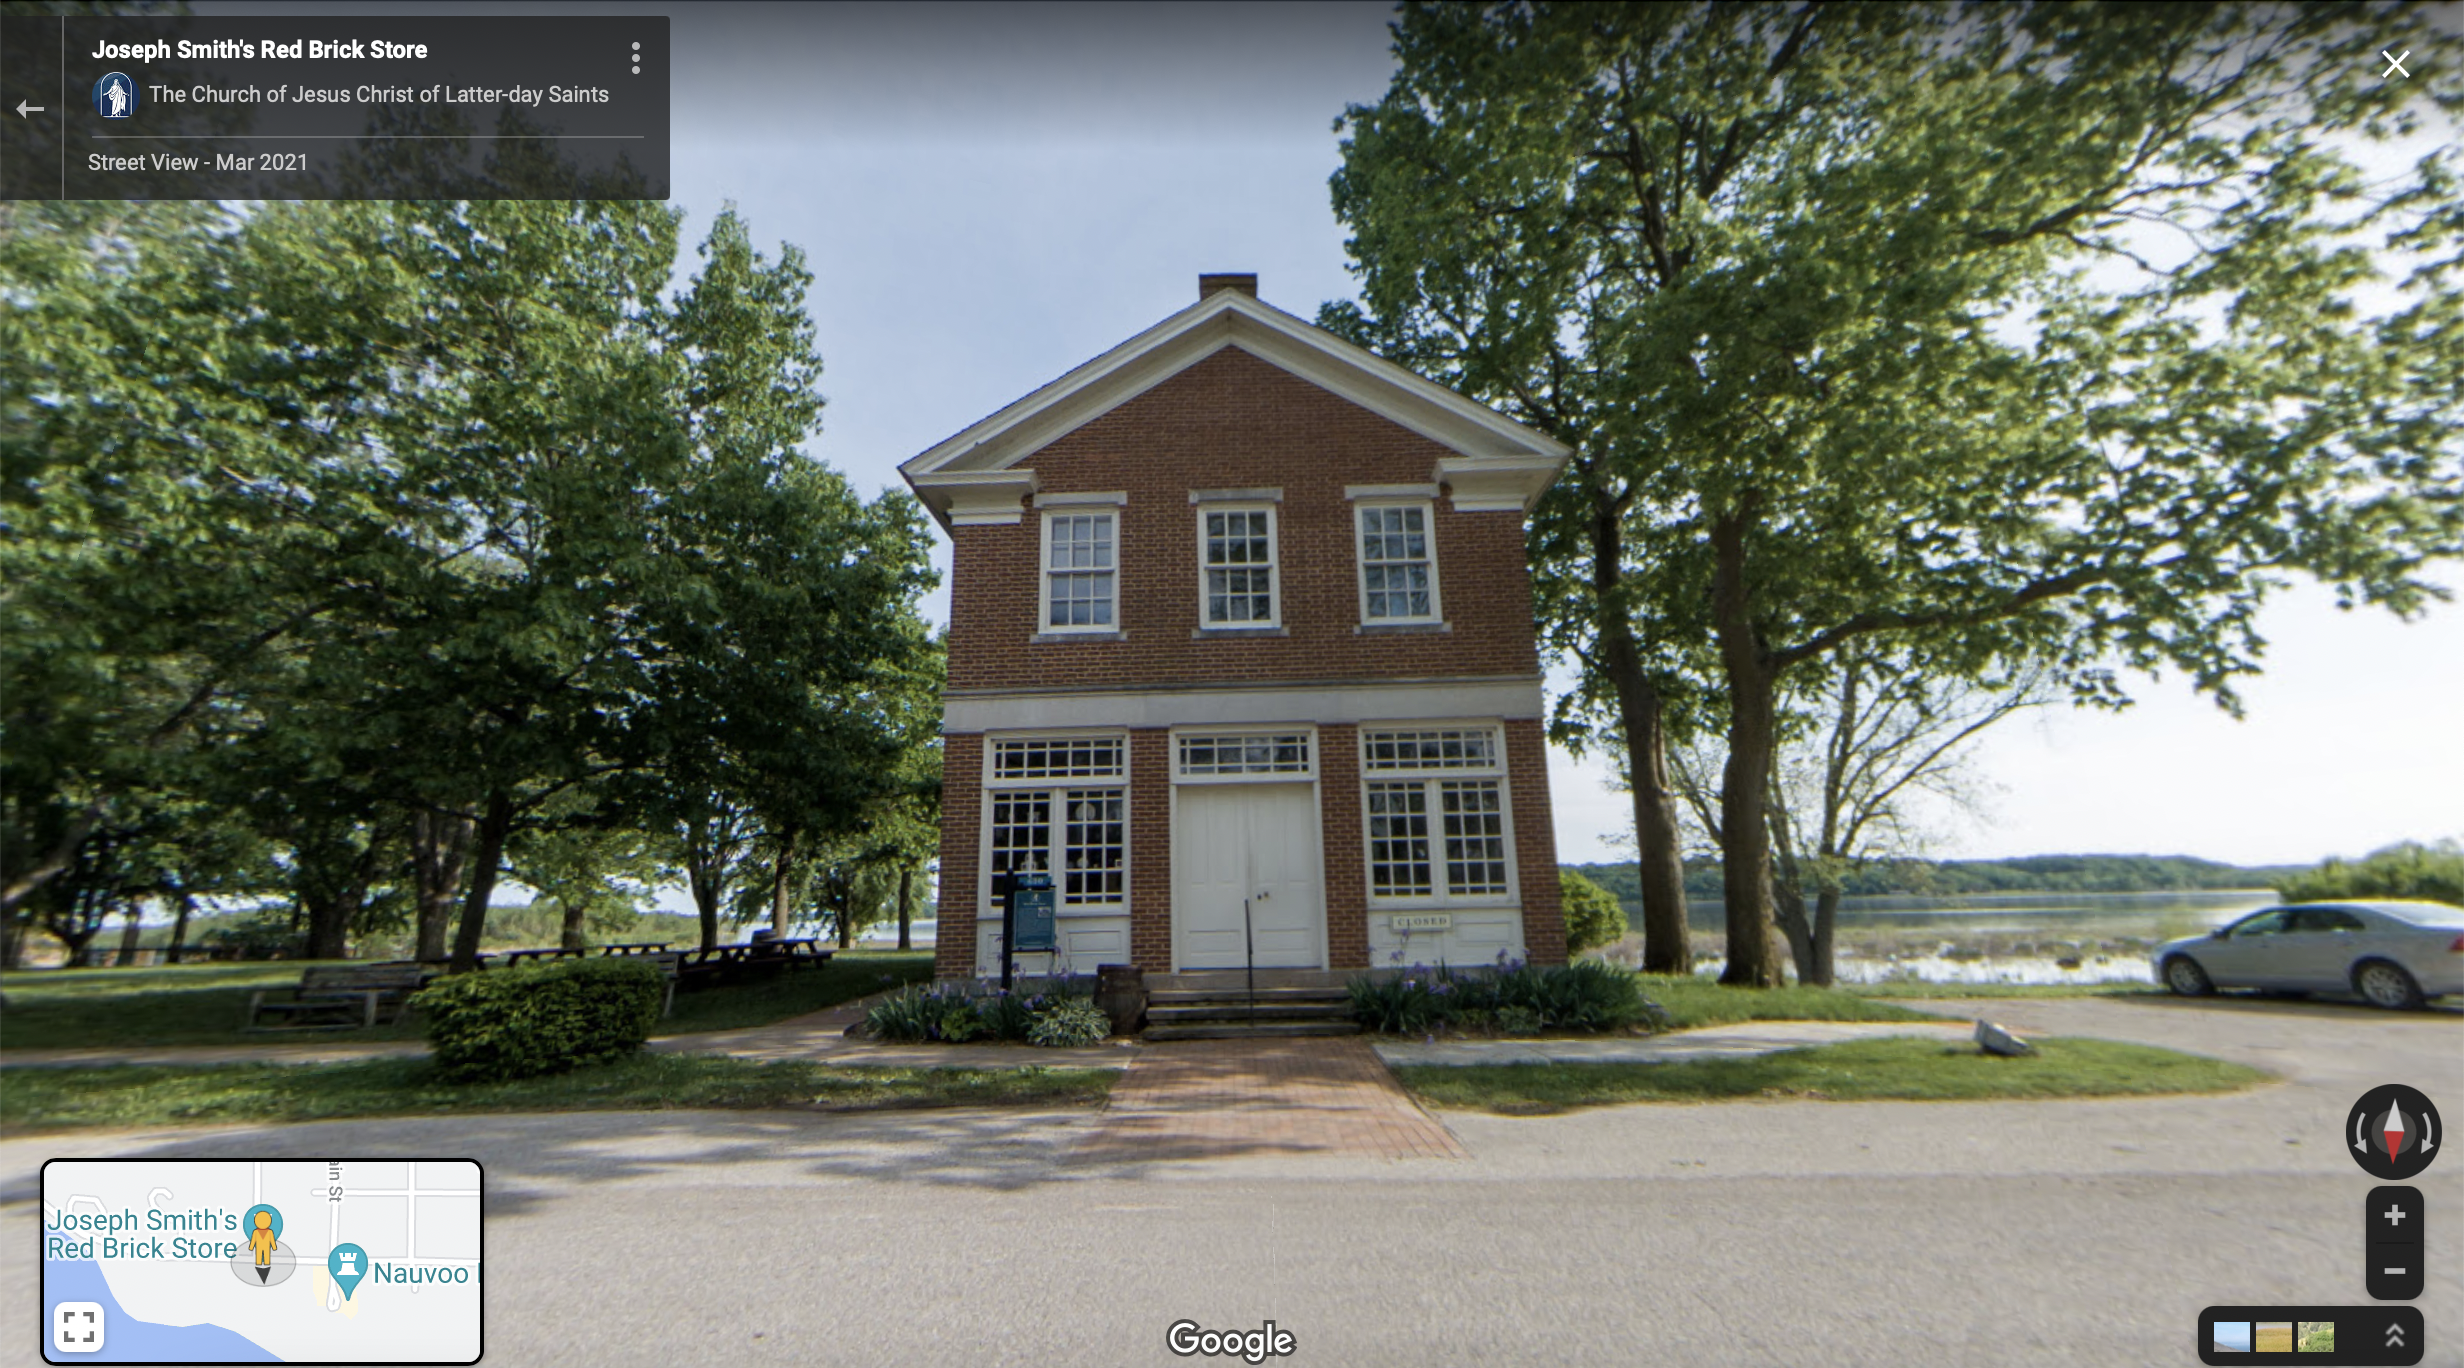 Screenshot of the Google Maps 360 view of the Red Brick Store